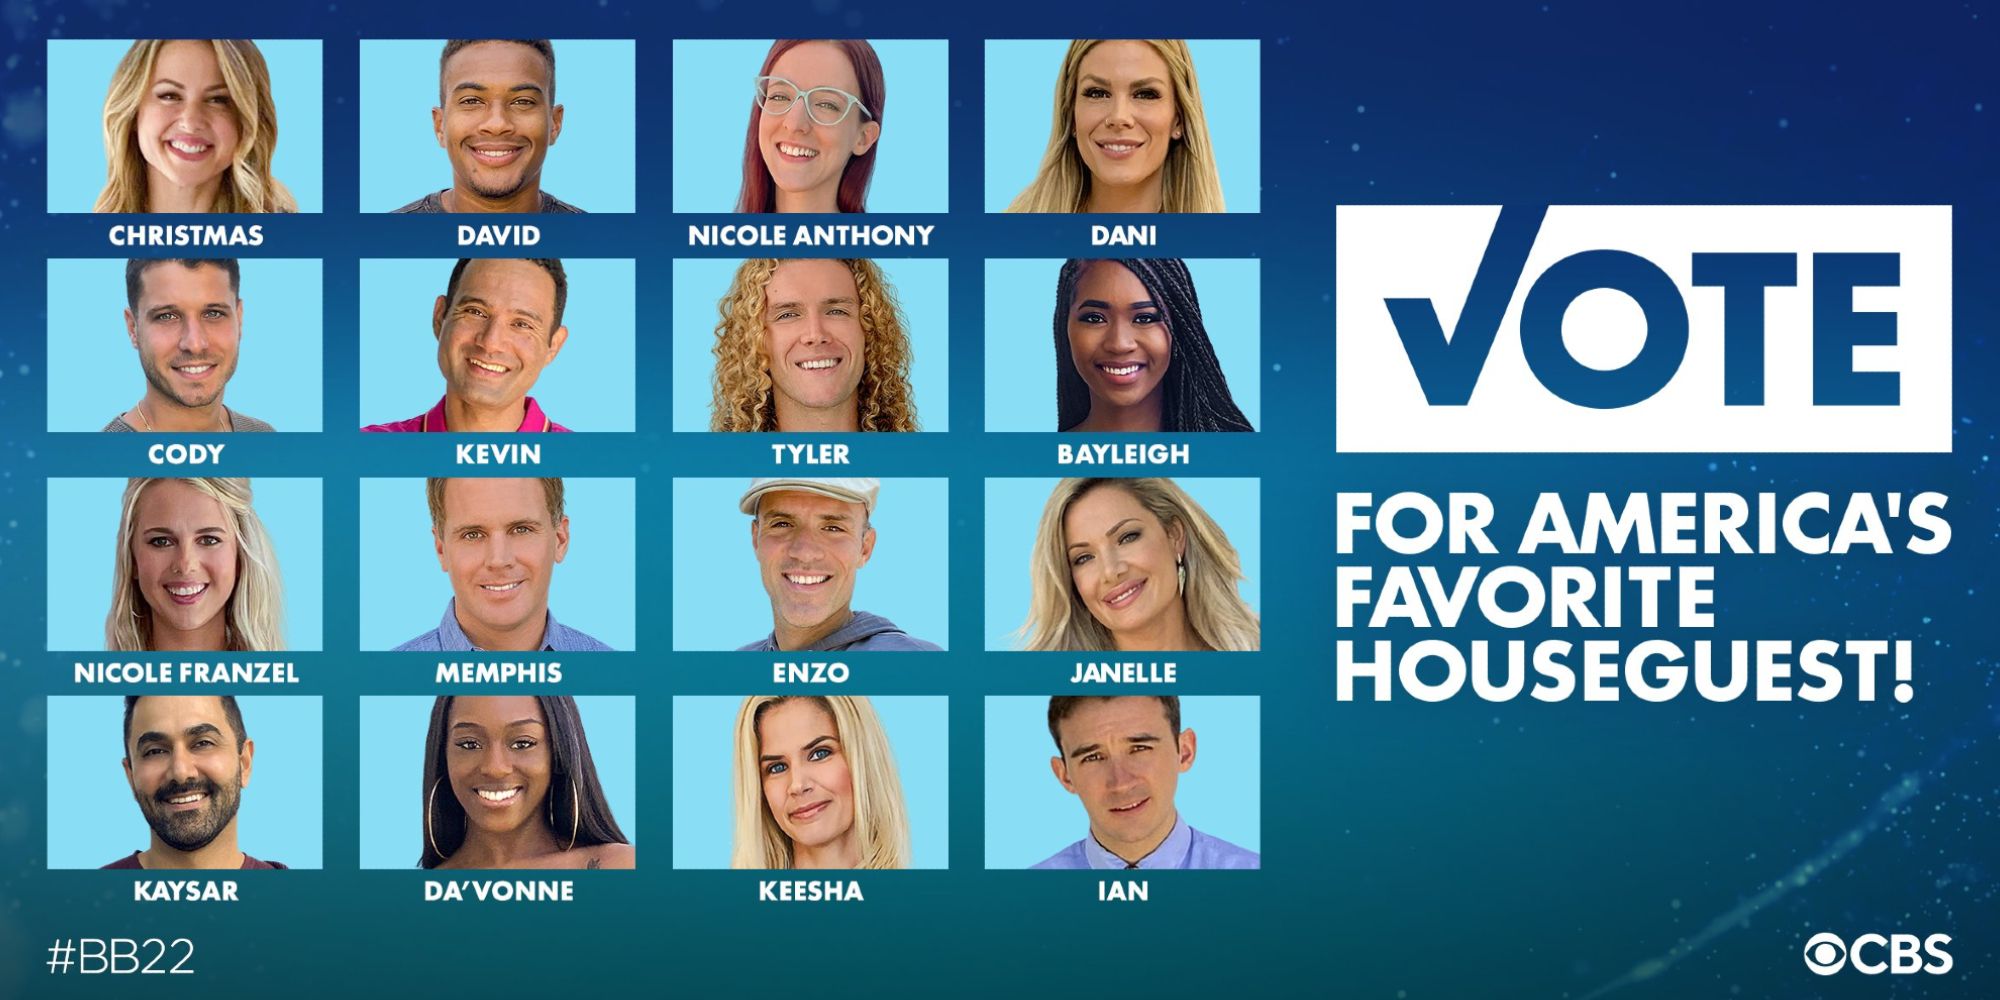 Vote for America's favorite houseguest in Big Brother 23